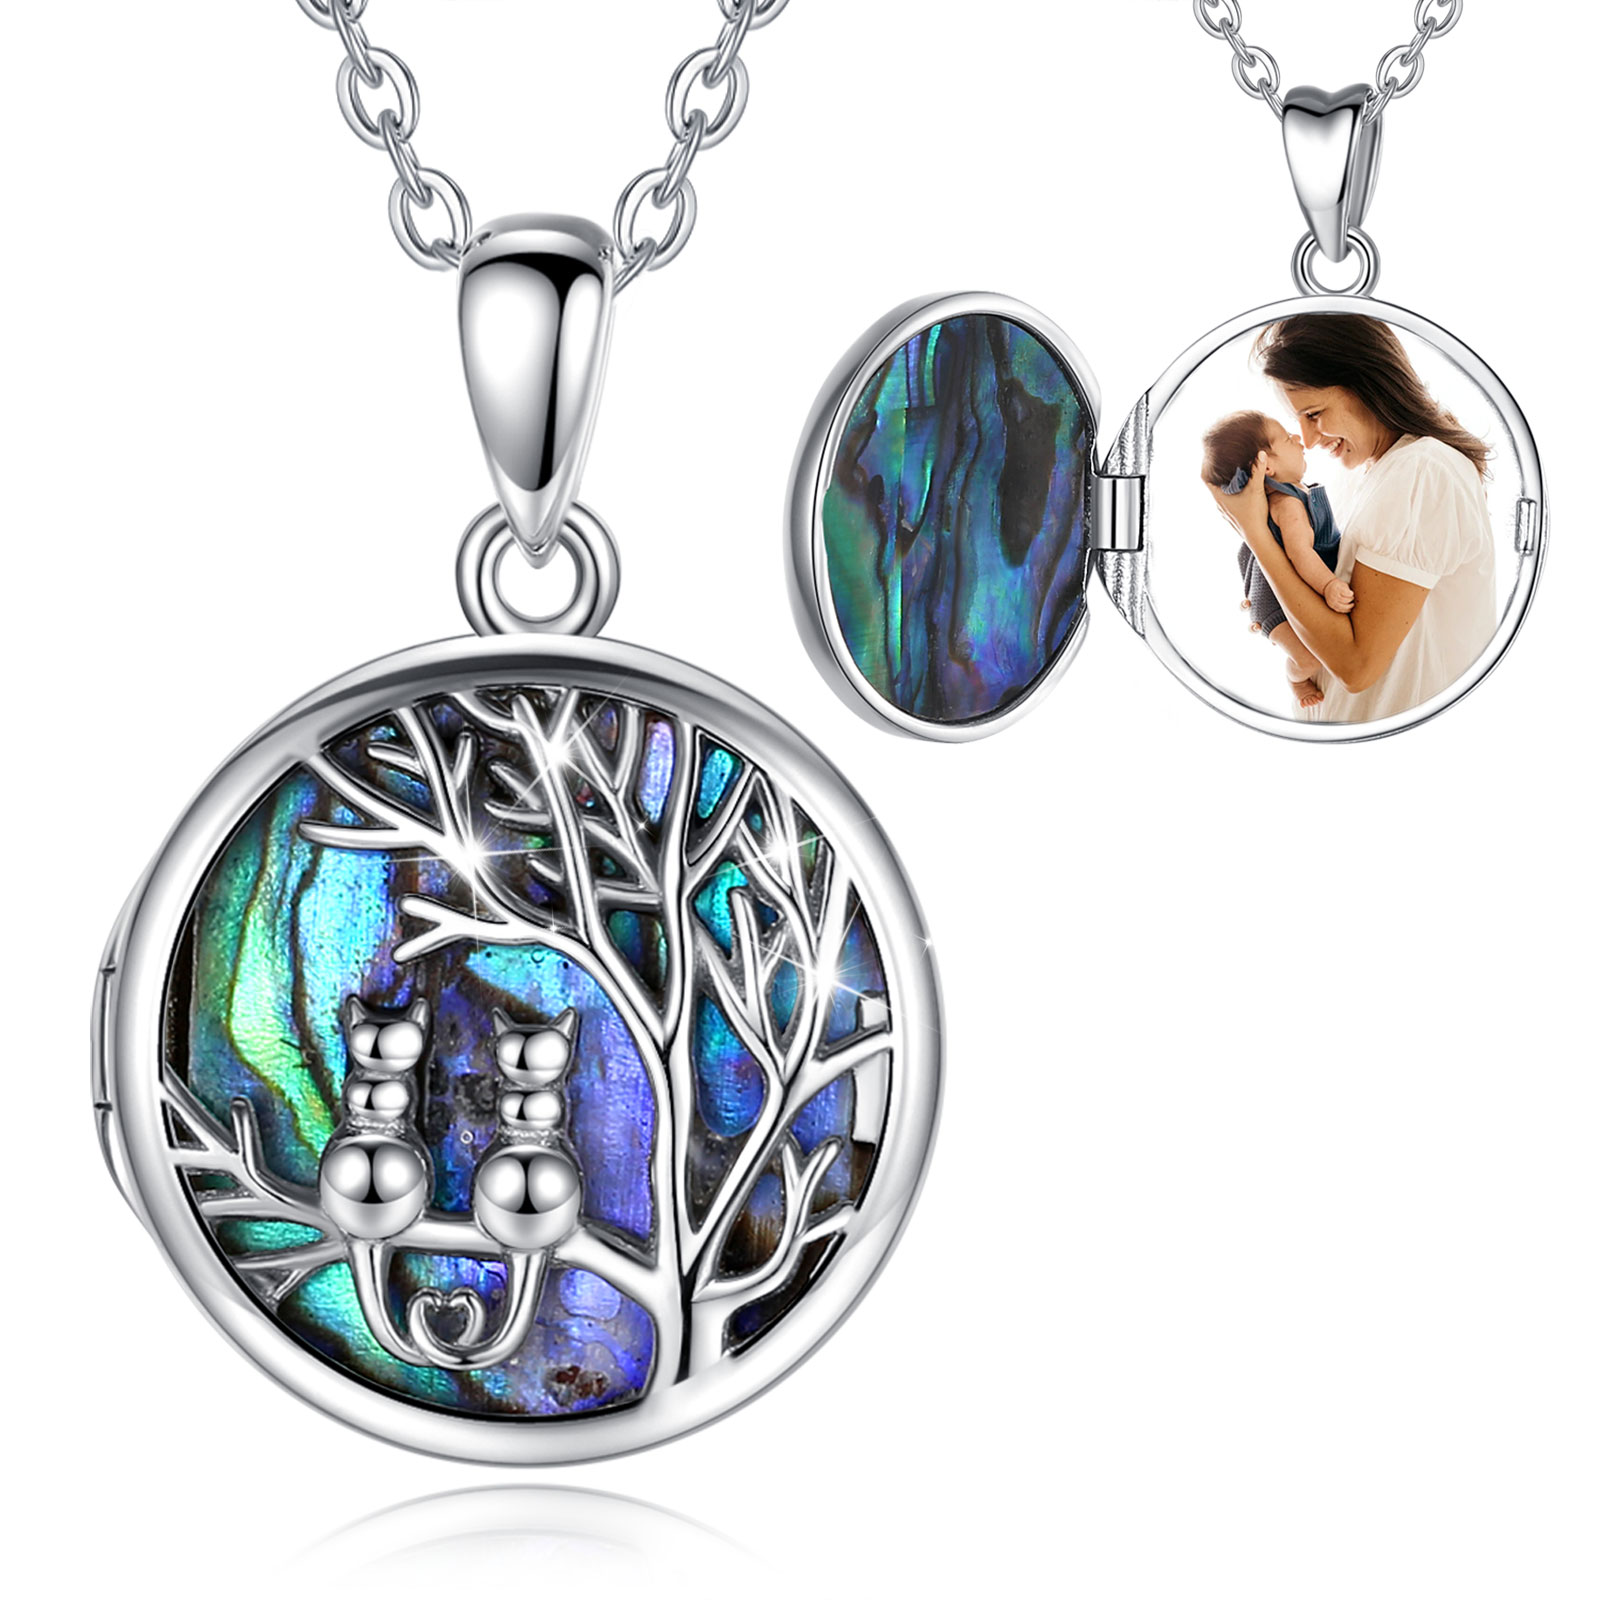 Merryshine Jewelry Cat and Tree S925 Sterling Silver Abalone Shell Photo Locket Necklace Pendant